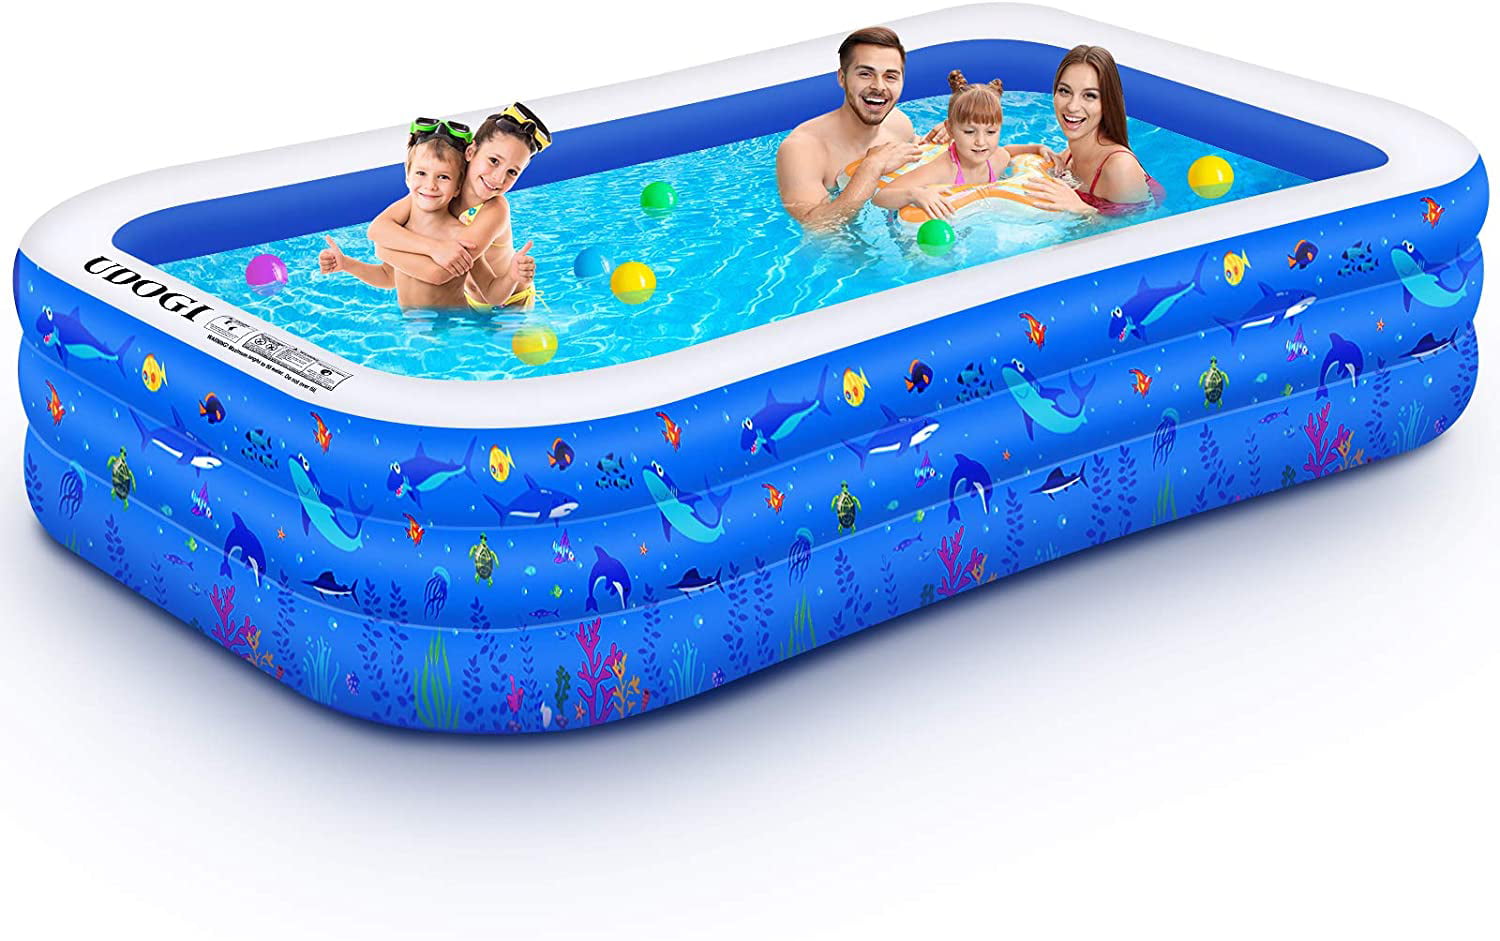 118 x 72 x 22 Blow Up Kiddie Pool for Kids Babies Basketball Hook Family Full-Sized Inflatable Pools Outdoor Backyard Garden Basketball Cartoon Adults Toddlers Inflatable Swimming Pool 